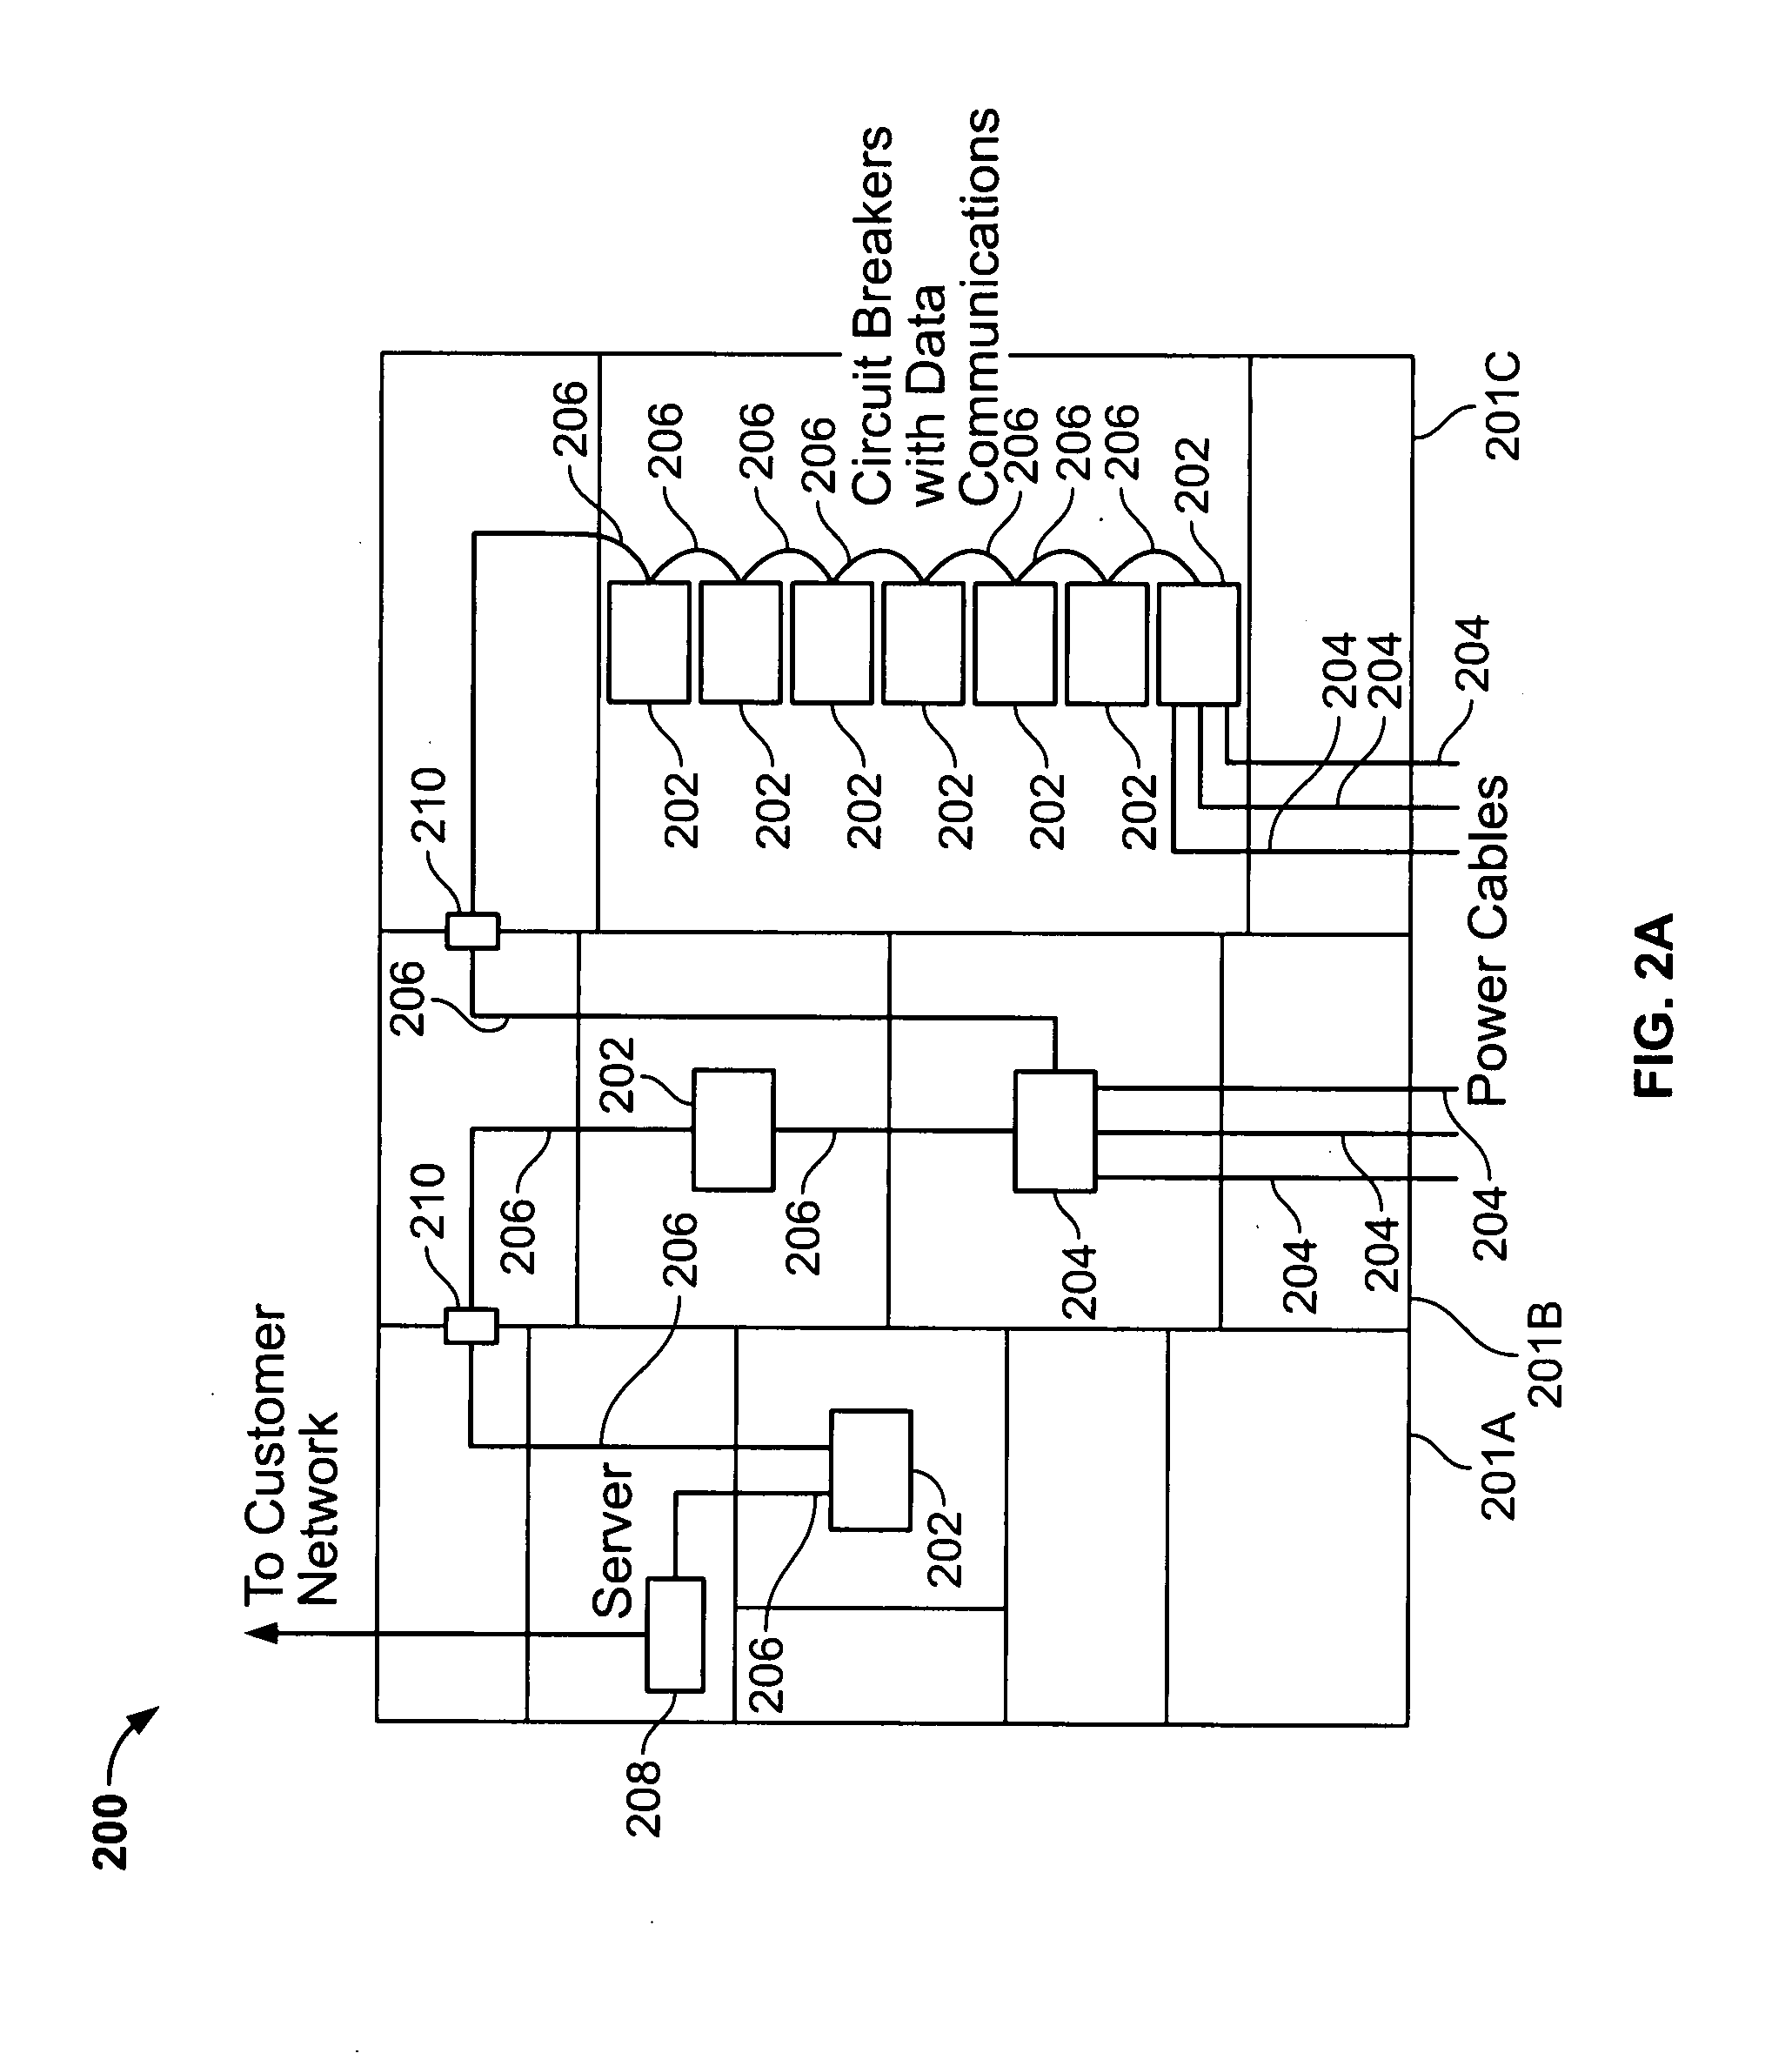 Circuit breaker integral temperature monitoring for advance detection of defective power conductor connections